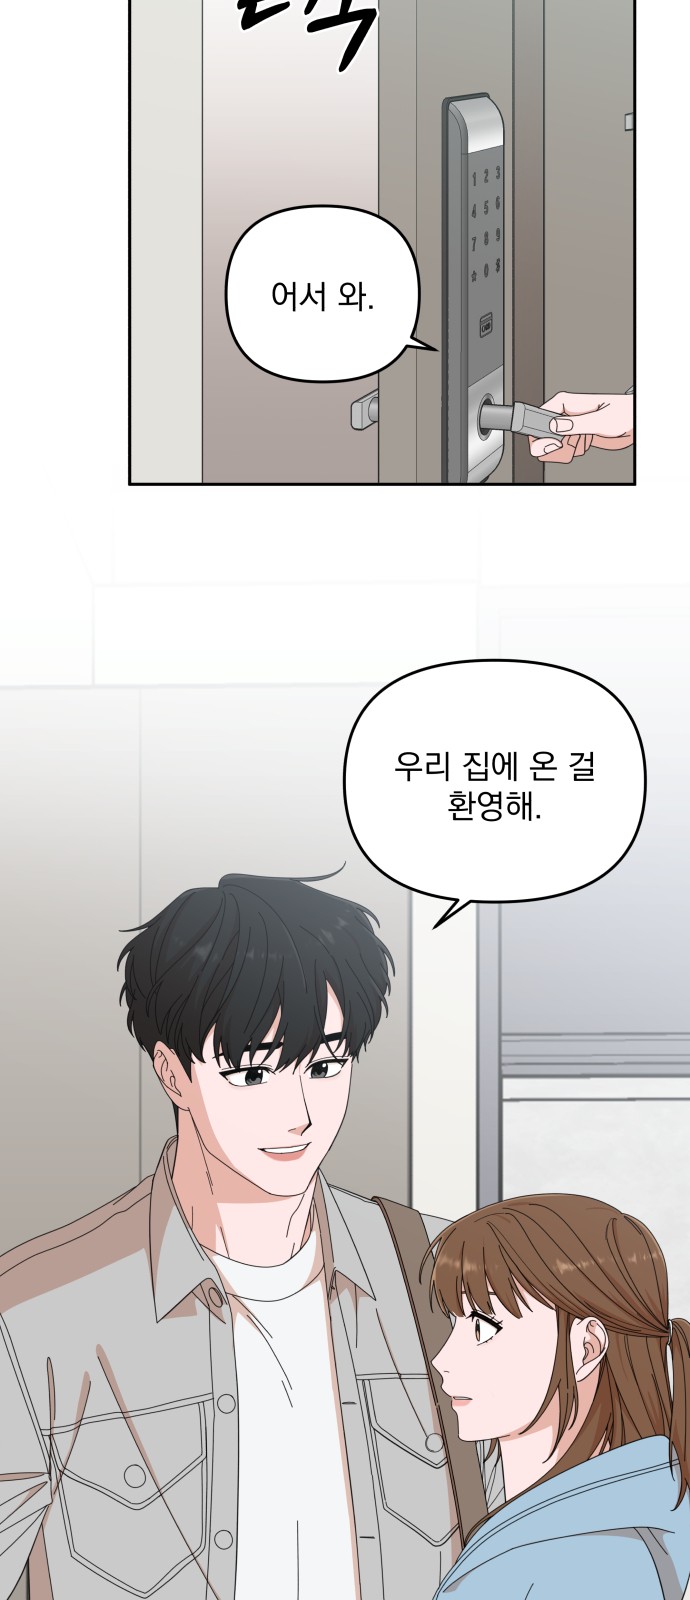 The Man With Pretty Lips - Chapter 4 - Page 71